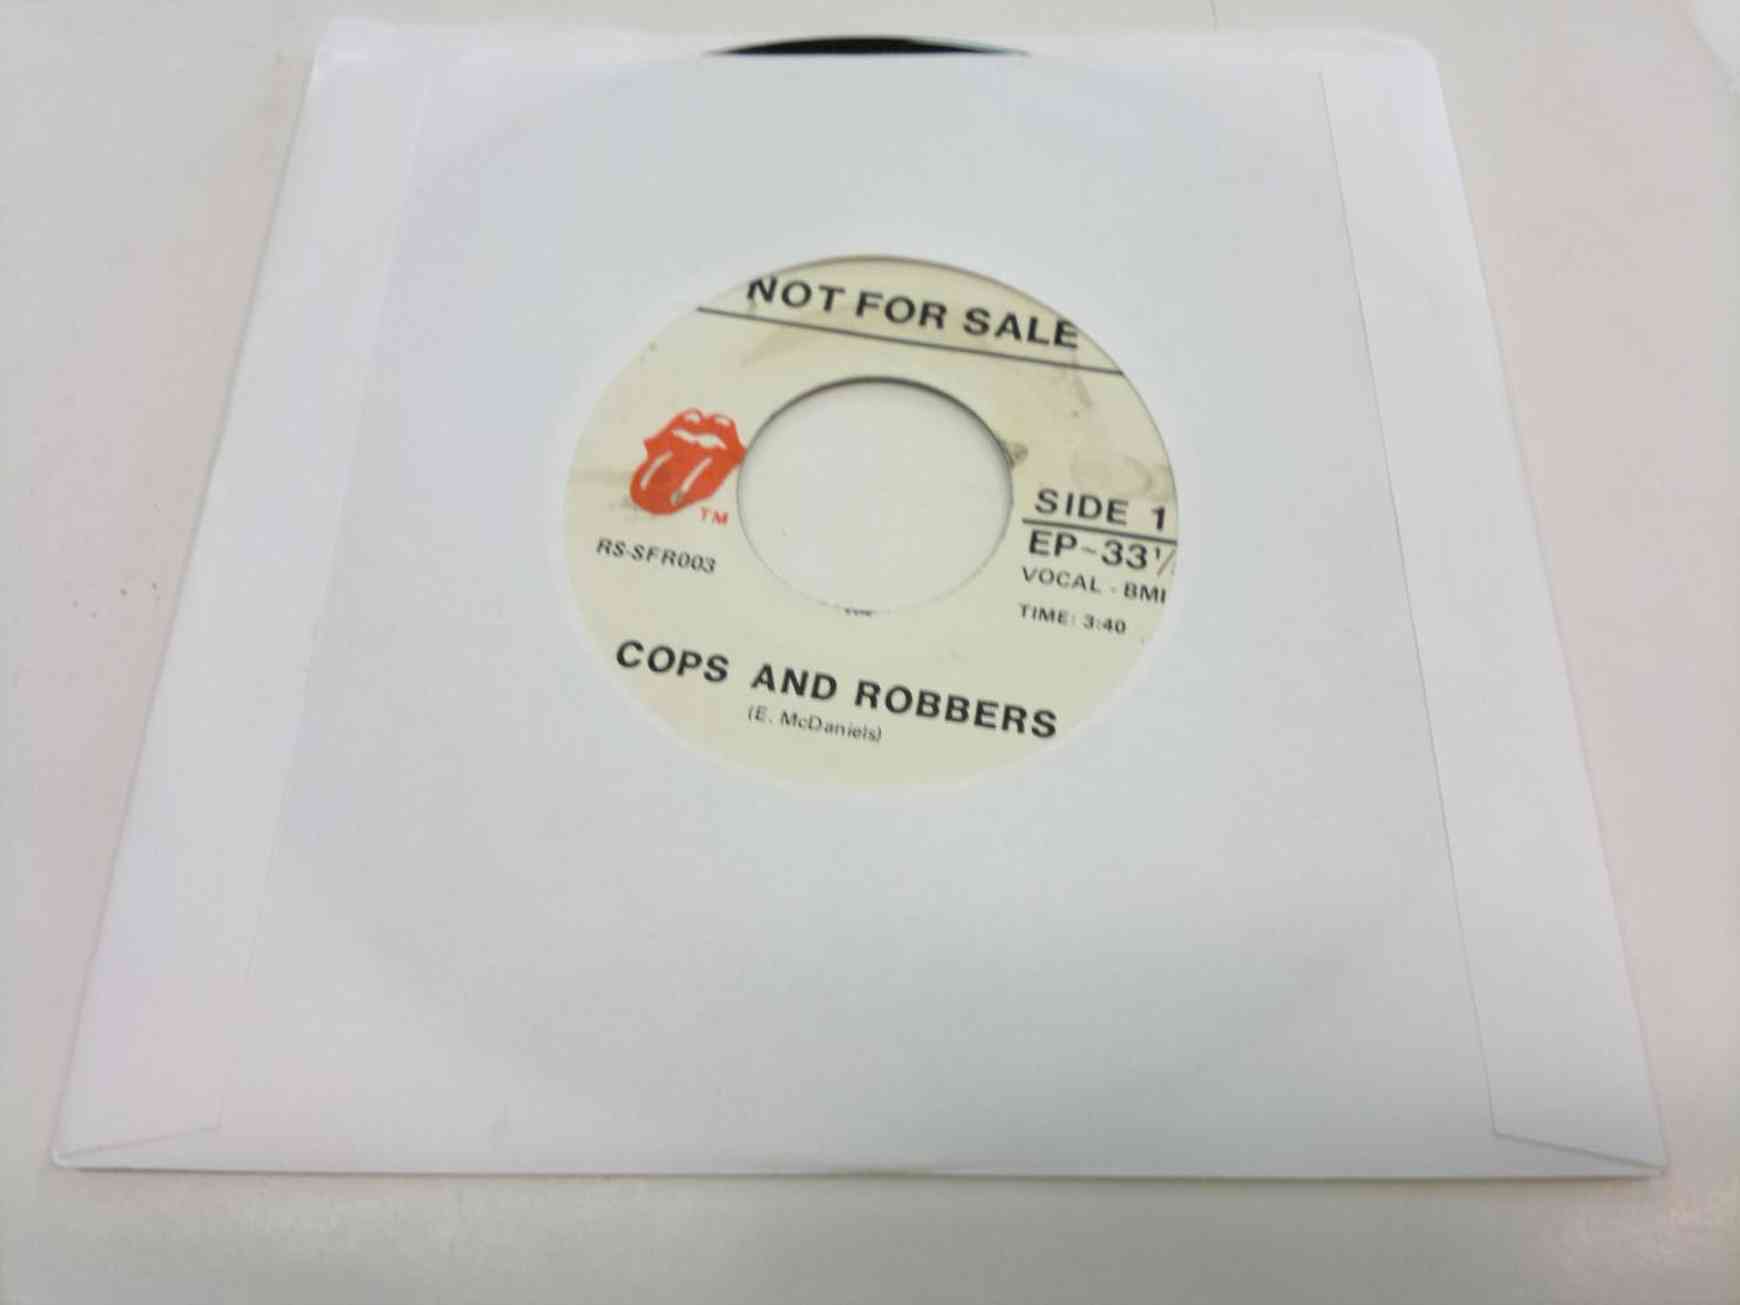 ROLLING STONES - COPS AND ROBBERS - PROMO